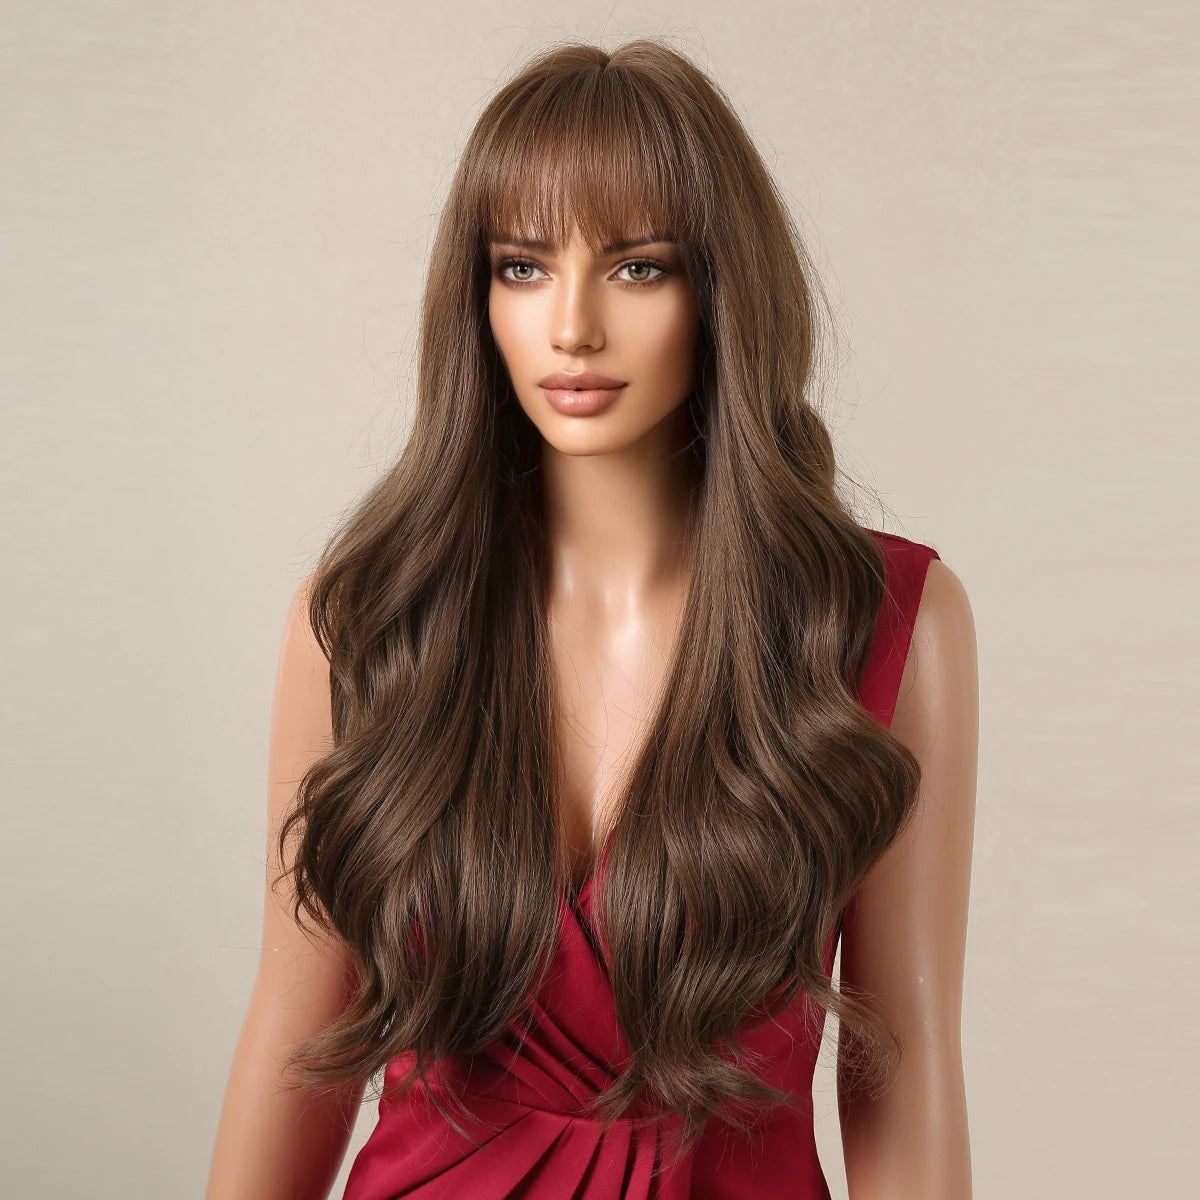 Dark Brown Long Wavy Wig - Crossdresser's Natural Synthetic Hair with Bangs for Daily & Party Use